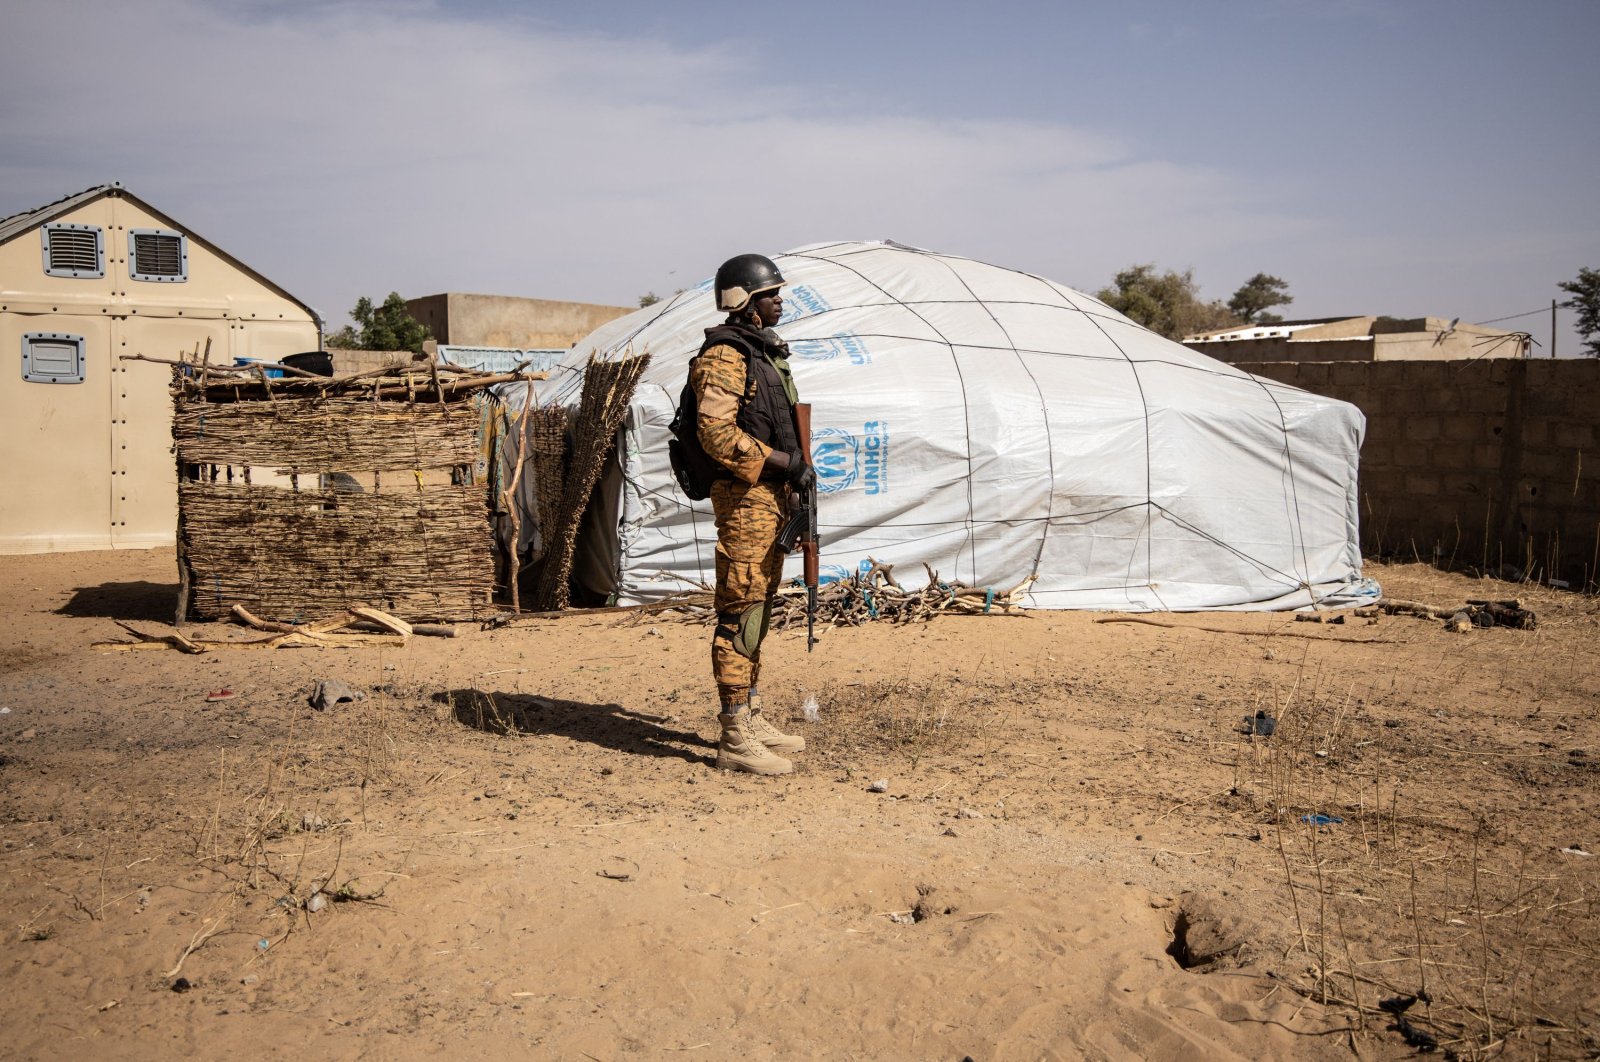 In this file photograph taken on February 3, 2020, a Burkina Faso soldier patrols at a camp sheltering Internally Displaced People (IDP) from northern Burkina Faso in Dori. (AFP Photo)